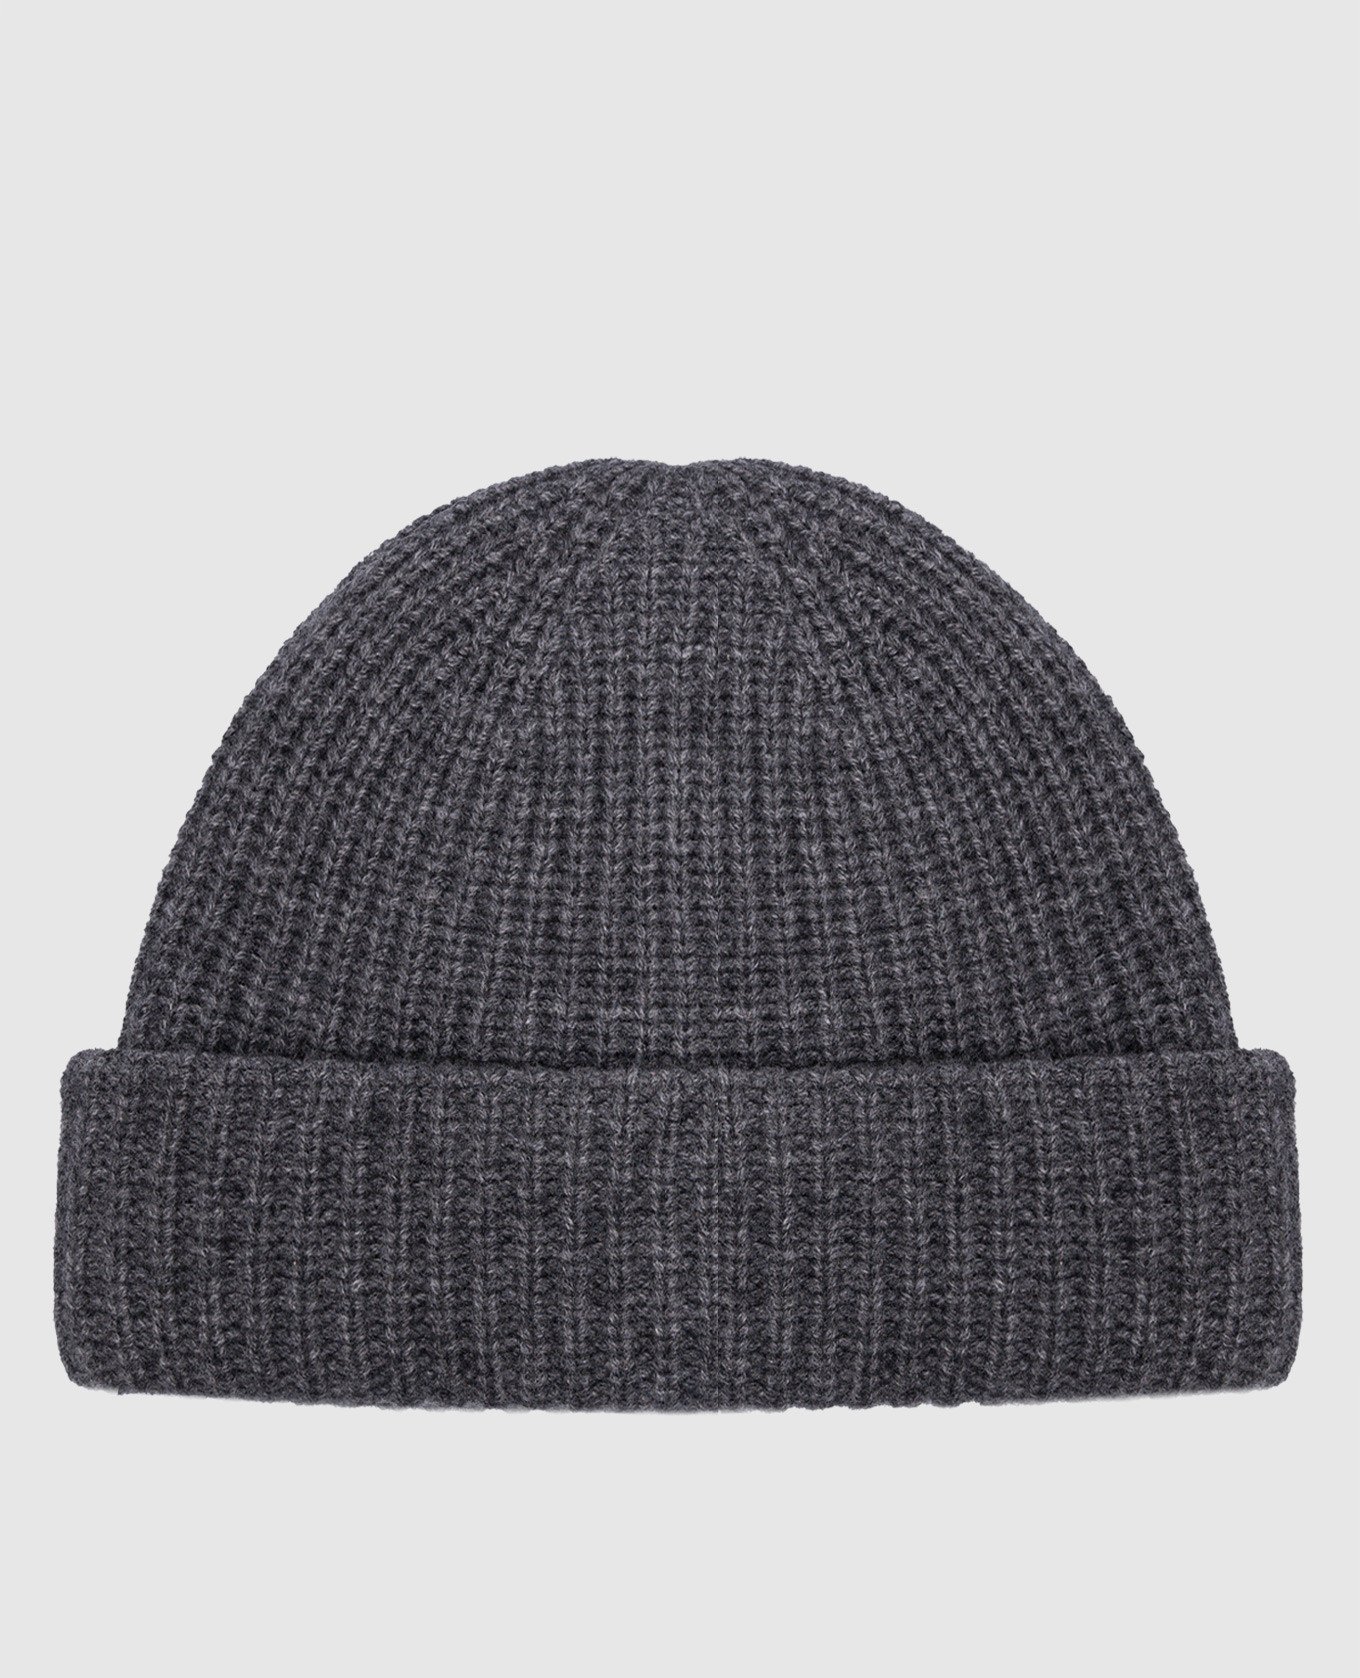 Gray cap made of wool and cashmere